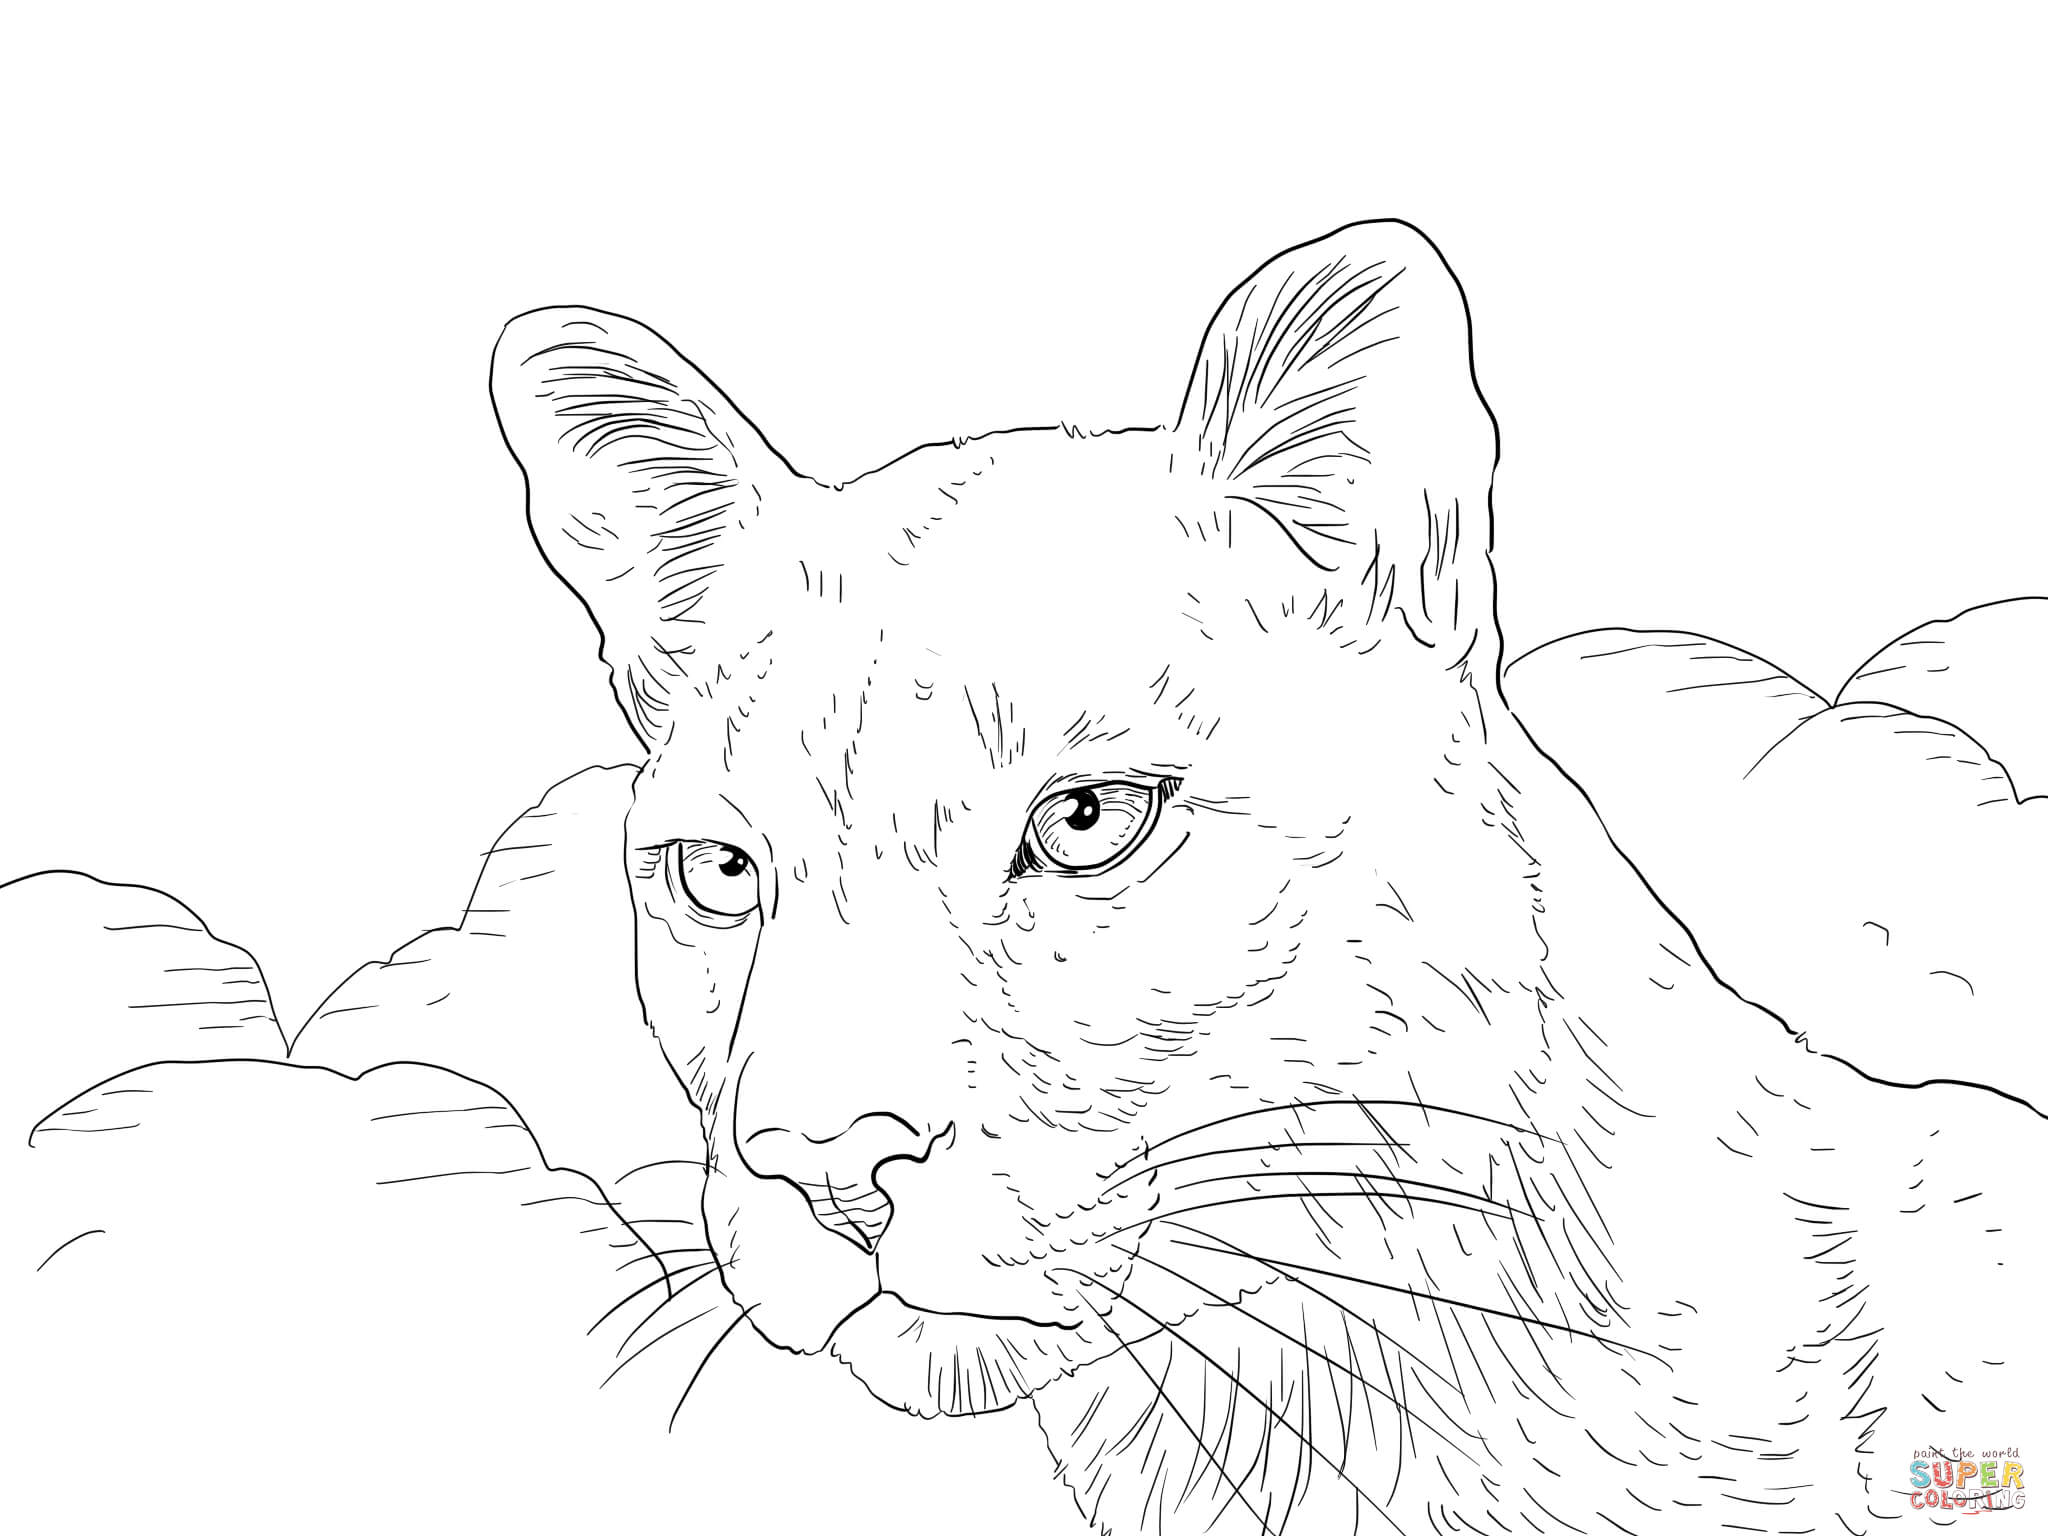 Florida Panther coloring page | Free Printable Coloring Pages